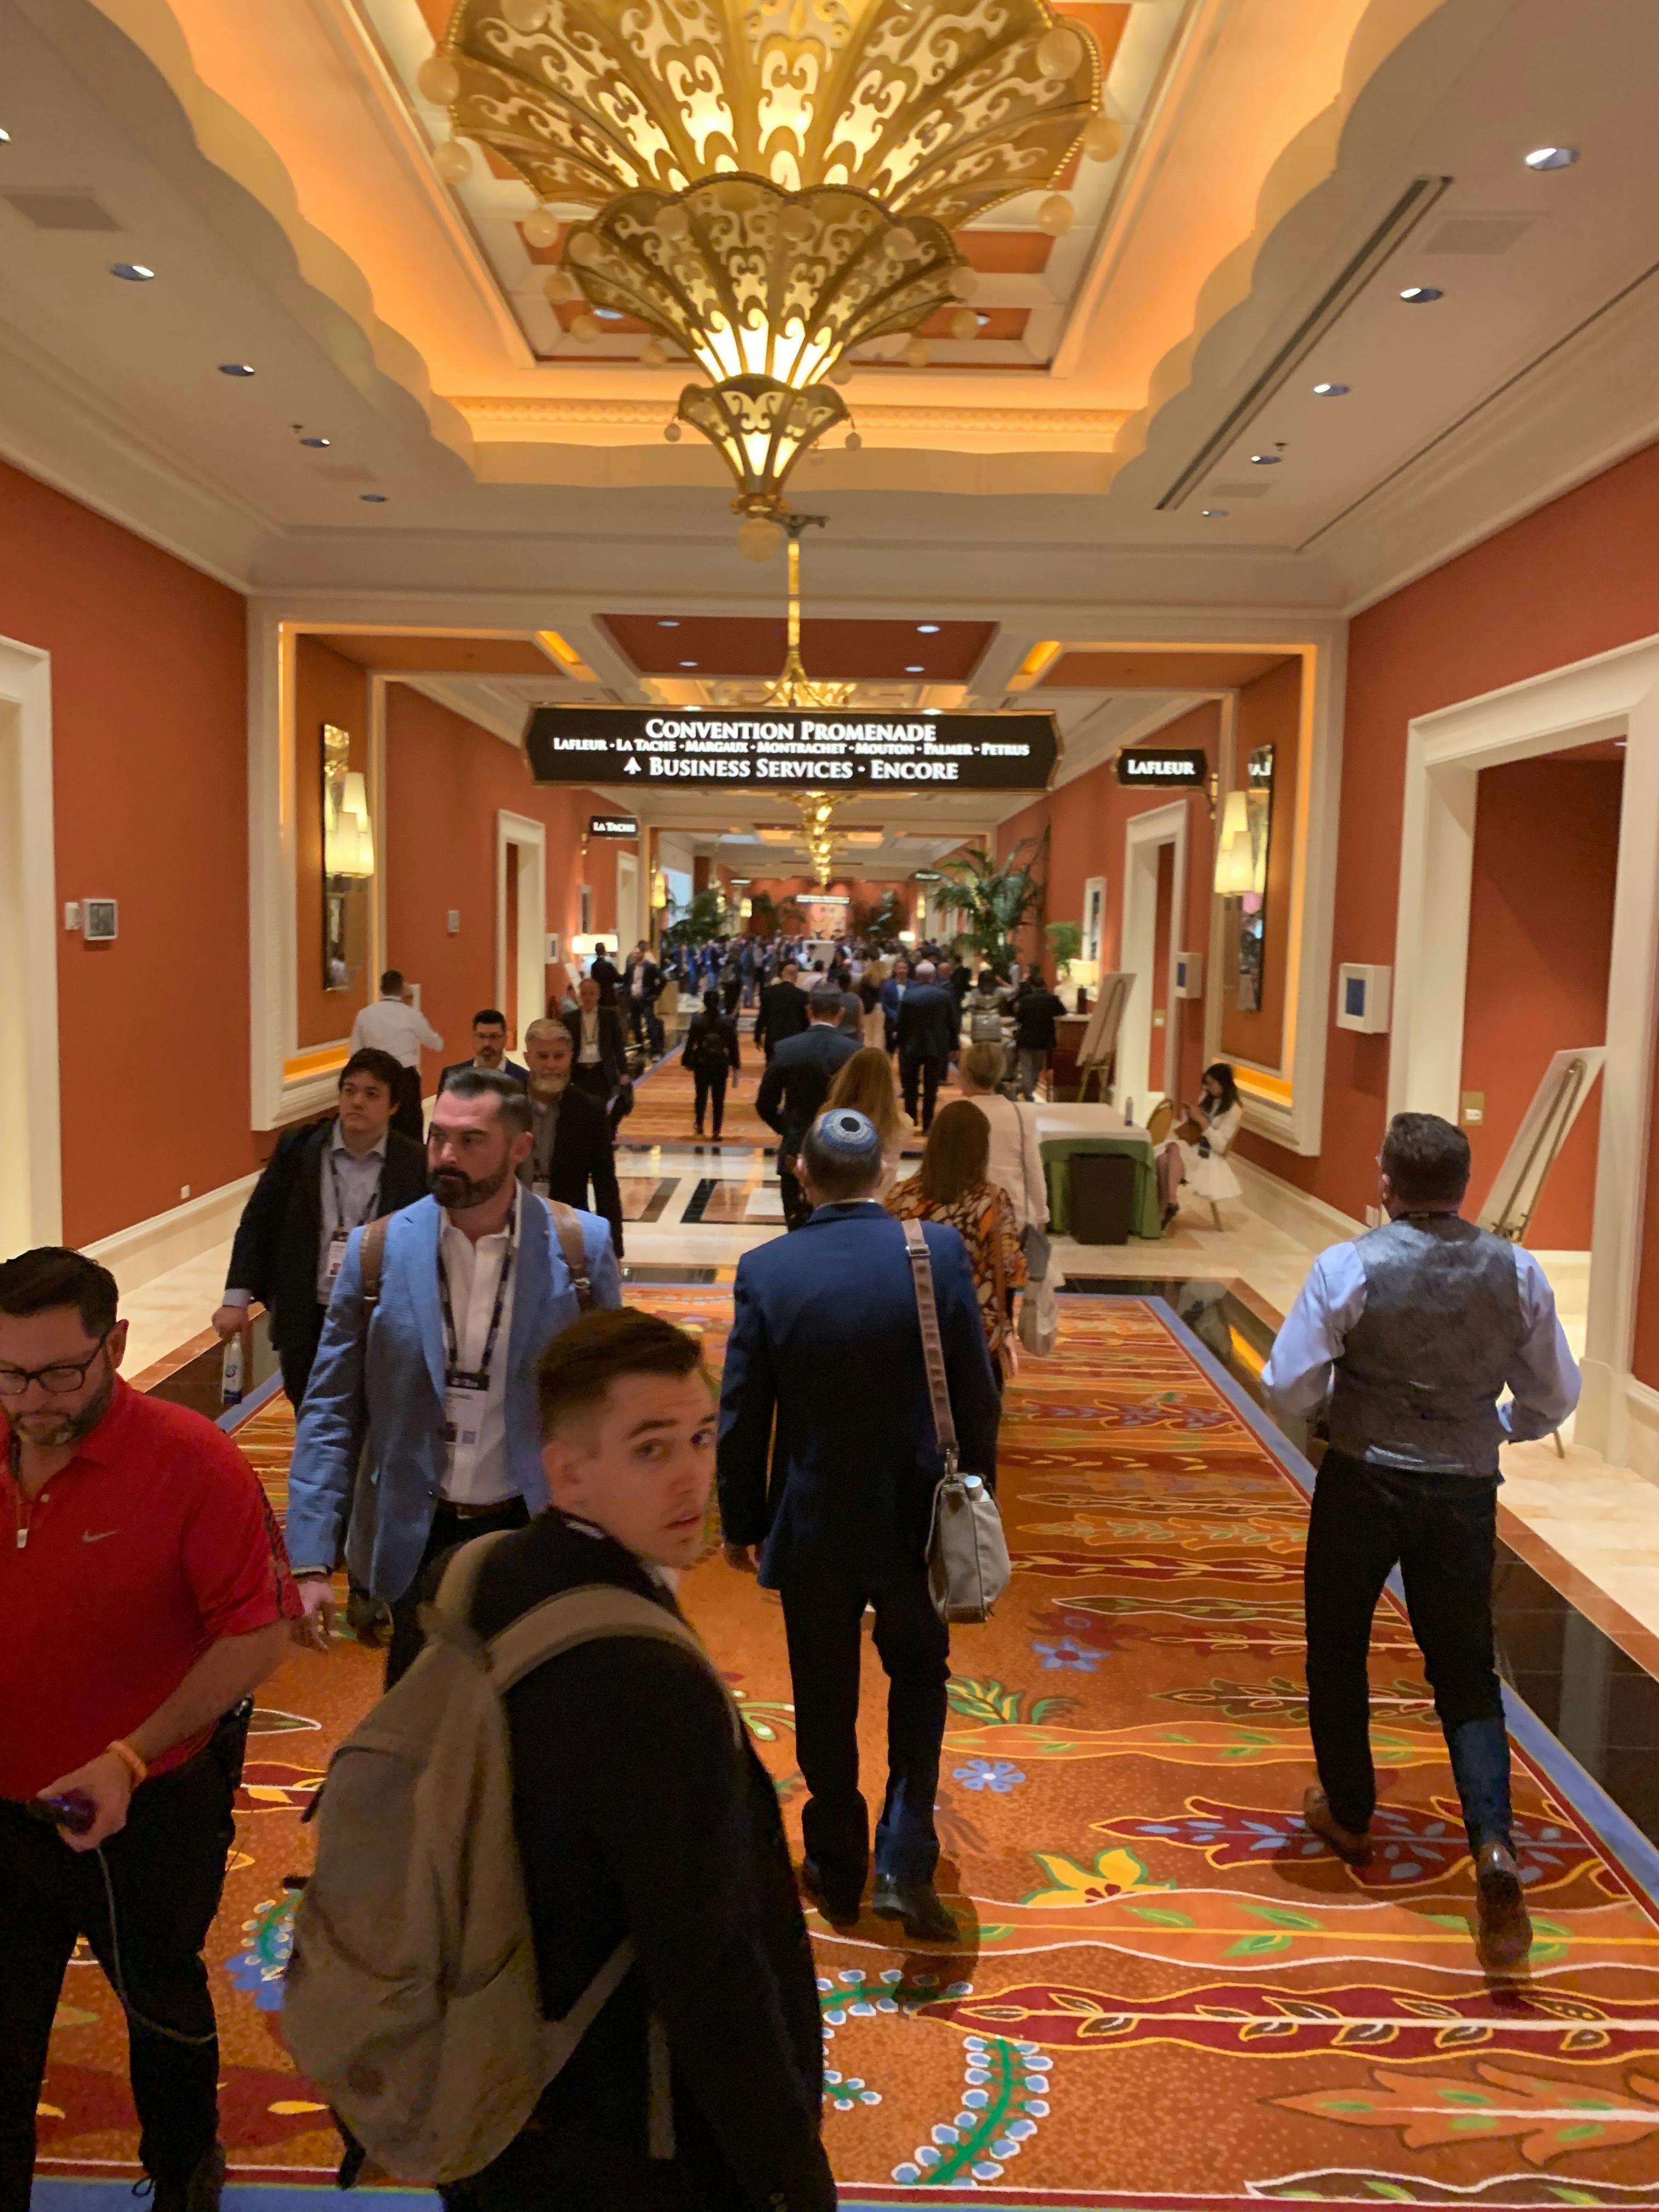 The hallways were busy at the Asembia Specialty Pharmacy Summit. Client meetings and business contact are the priority for many attendees.